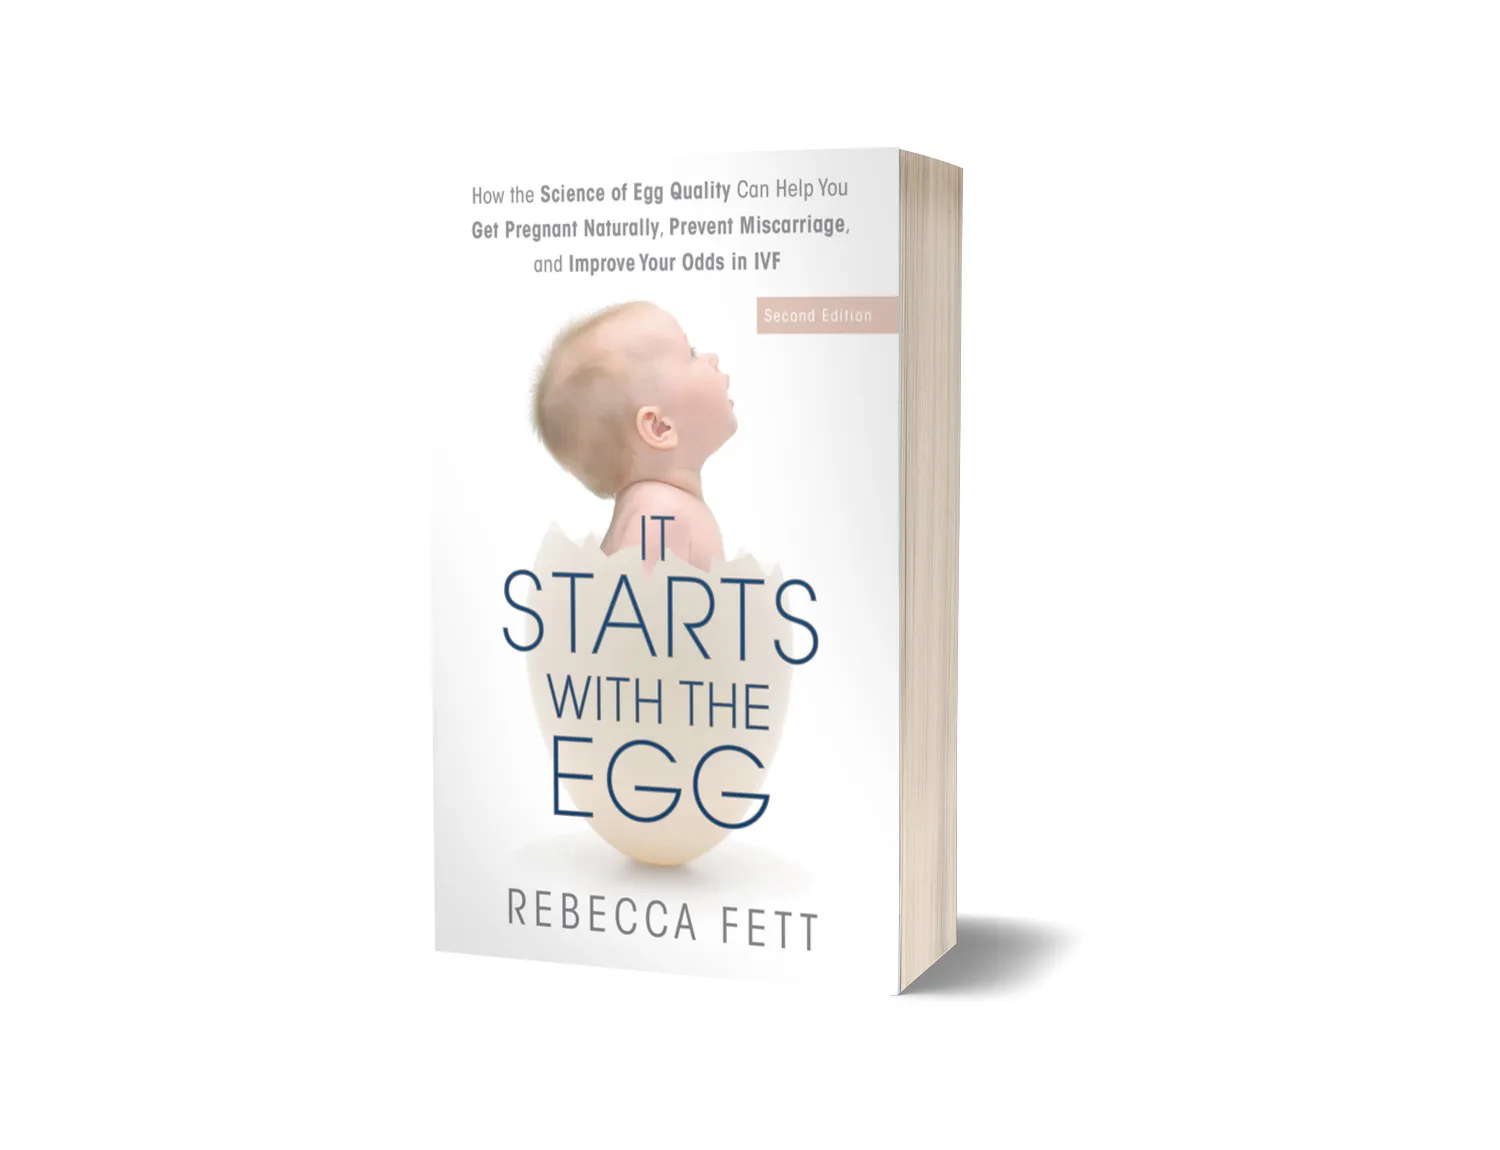 The book cover of It Starts With The Egg